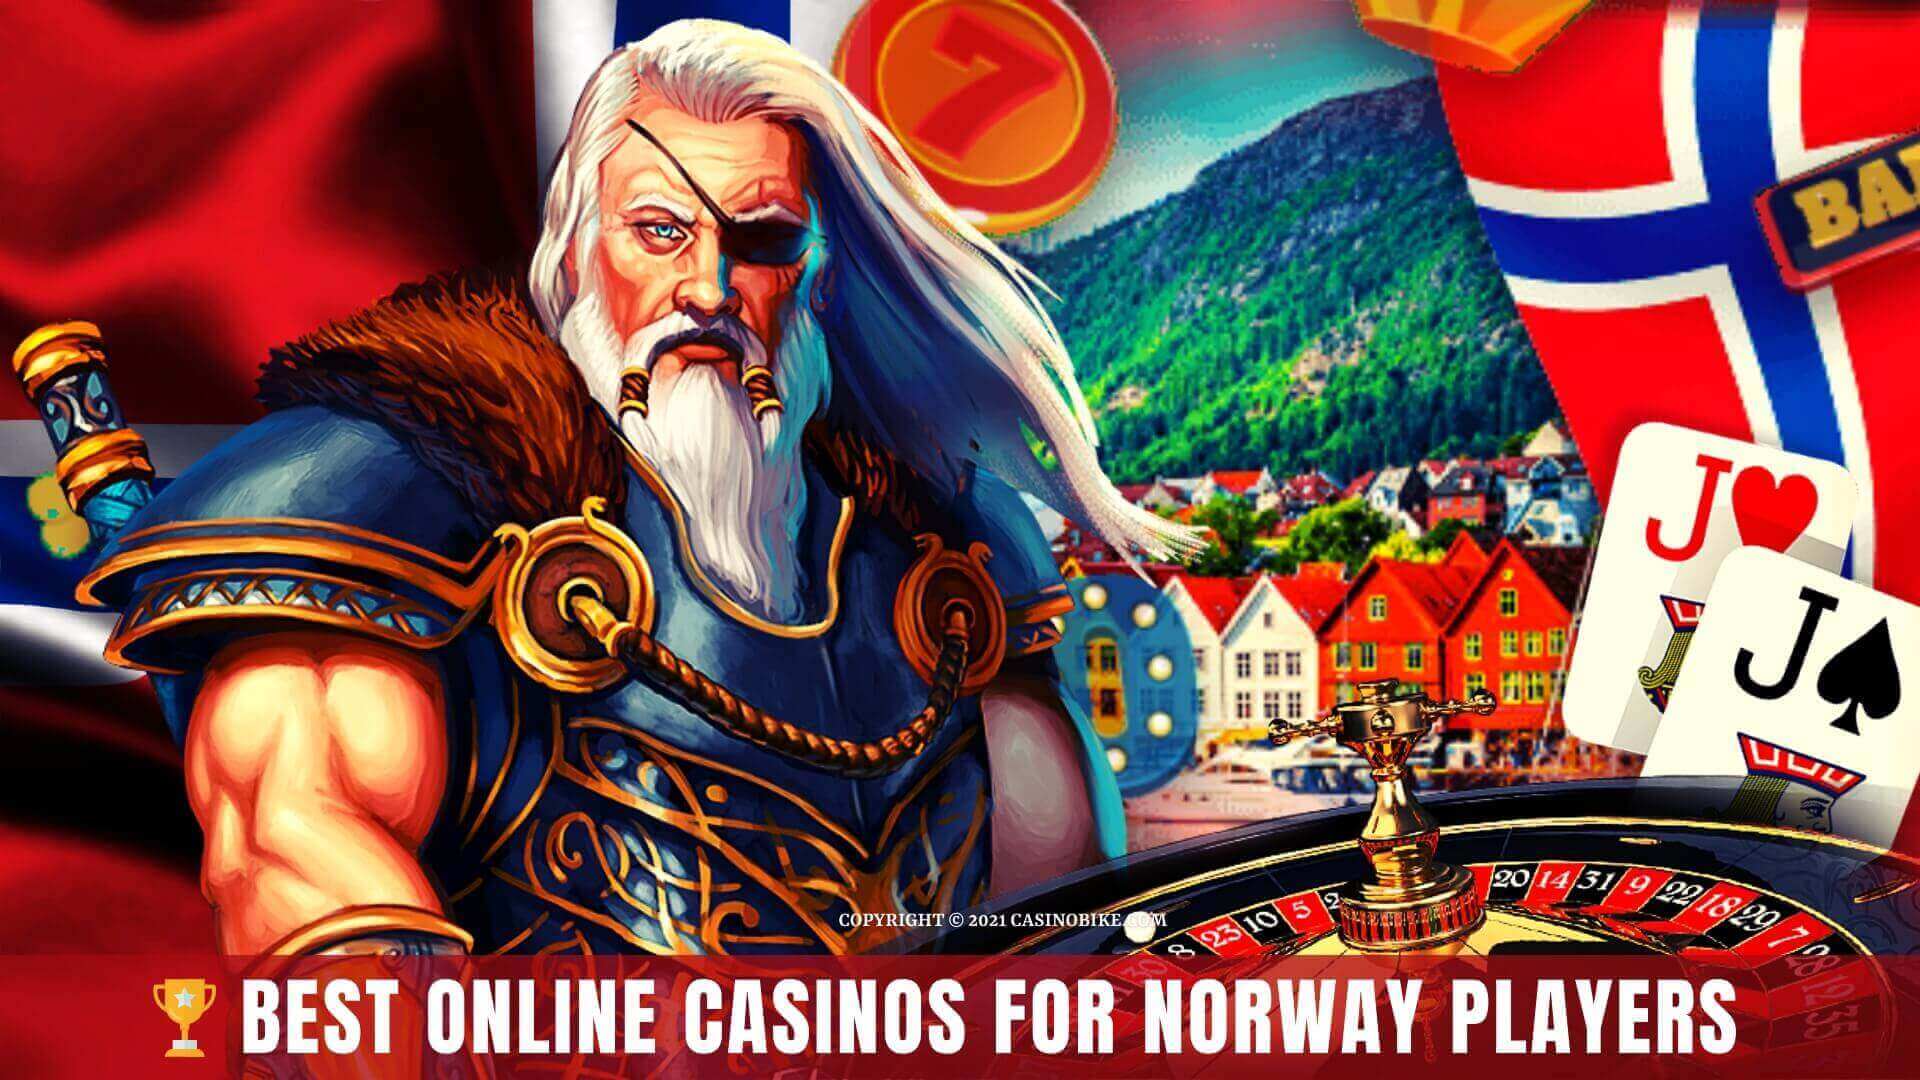 Best Online Casinos for Norway Players